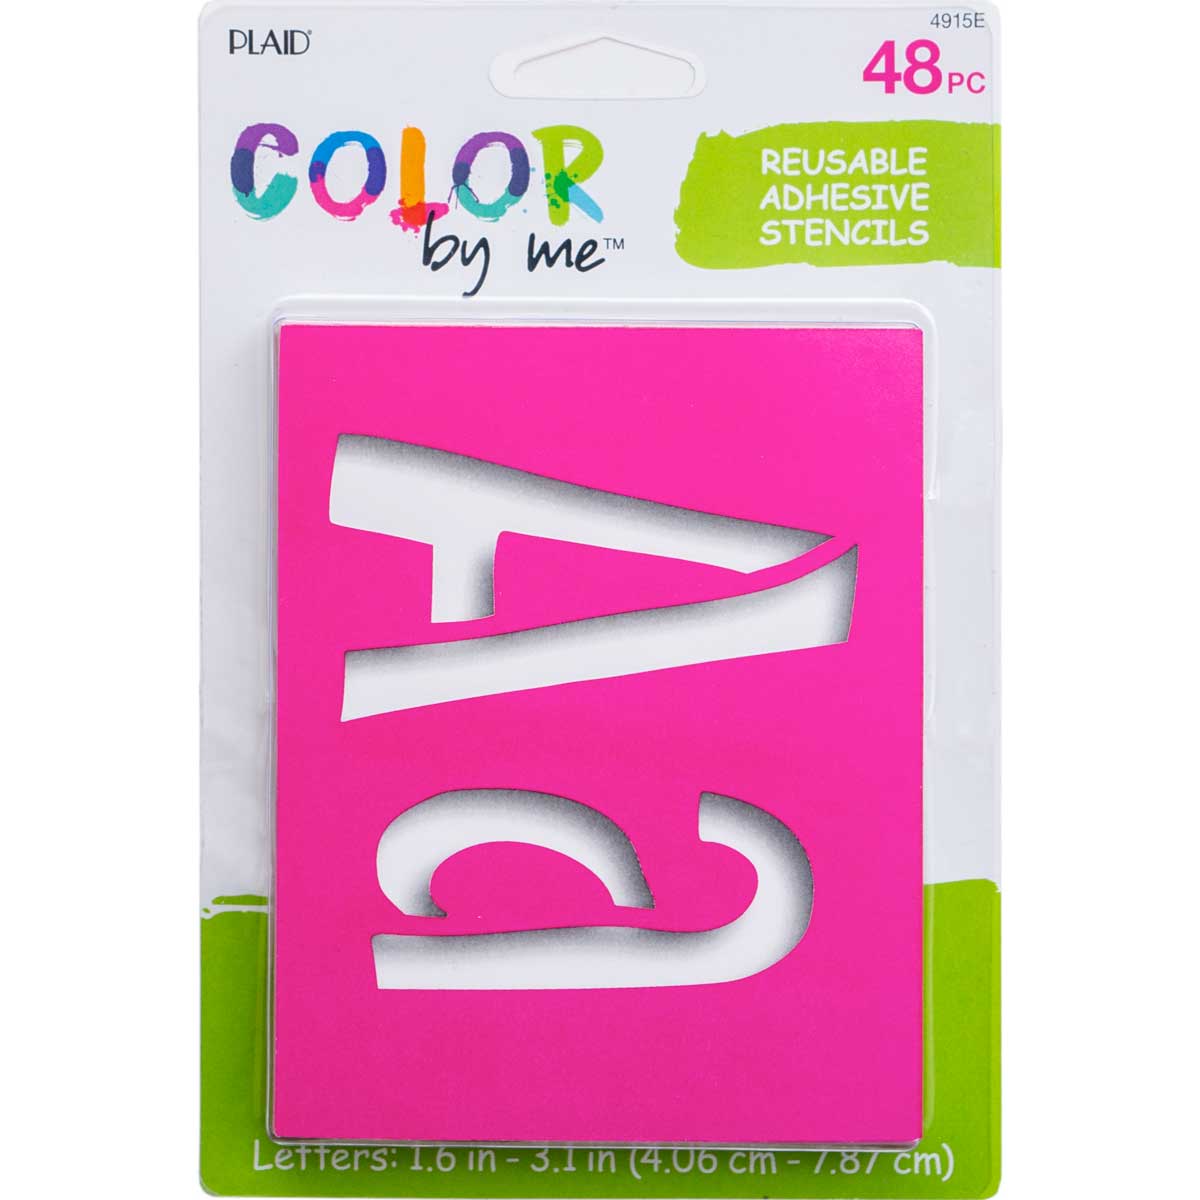 Plaid ® Color By Me™ Adhesive Stencils - Sweets & Treats Letters - 4915E